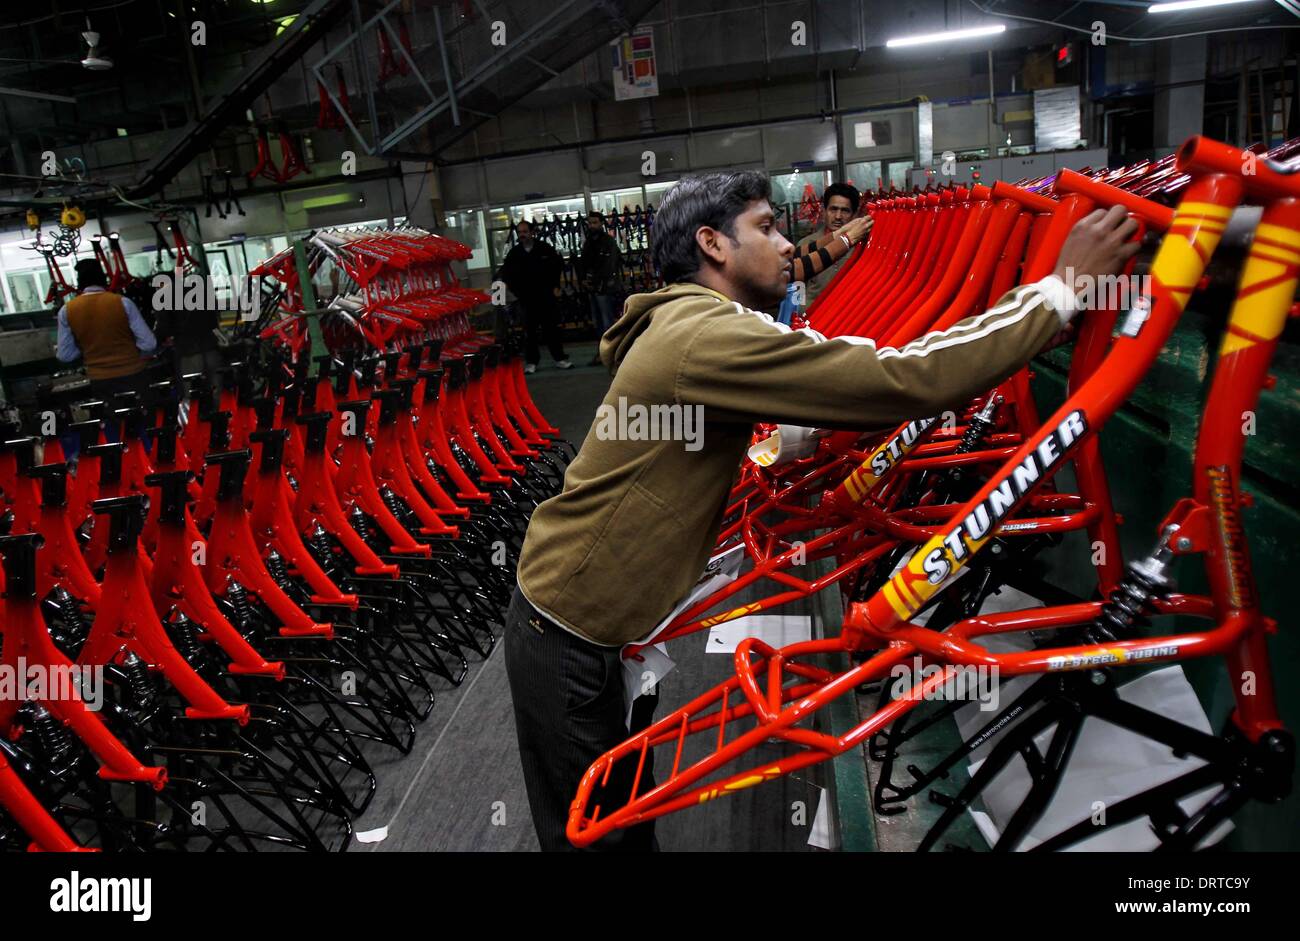 (140201) -- PUNJAB, Feb. 1, 2014 (Xinhua) -- A Worker pastes stickers on bicycle parts at a factory at Ludhina in Indian state of Punjab, Feb. 1, 2014. The north Indian state is the hub of bicycle manufacturing. Officials said 40,000-50,000 bicycles are manufactured in the city everyday and exported to Indian states and other countries. The state has around 4000 registered small and large units associated with making bicycle parts. (Xinhua/Javed Dar) Stock Photo